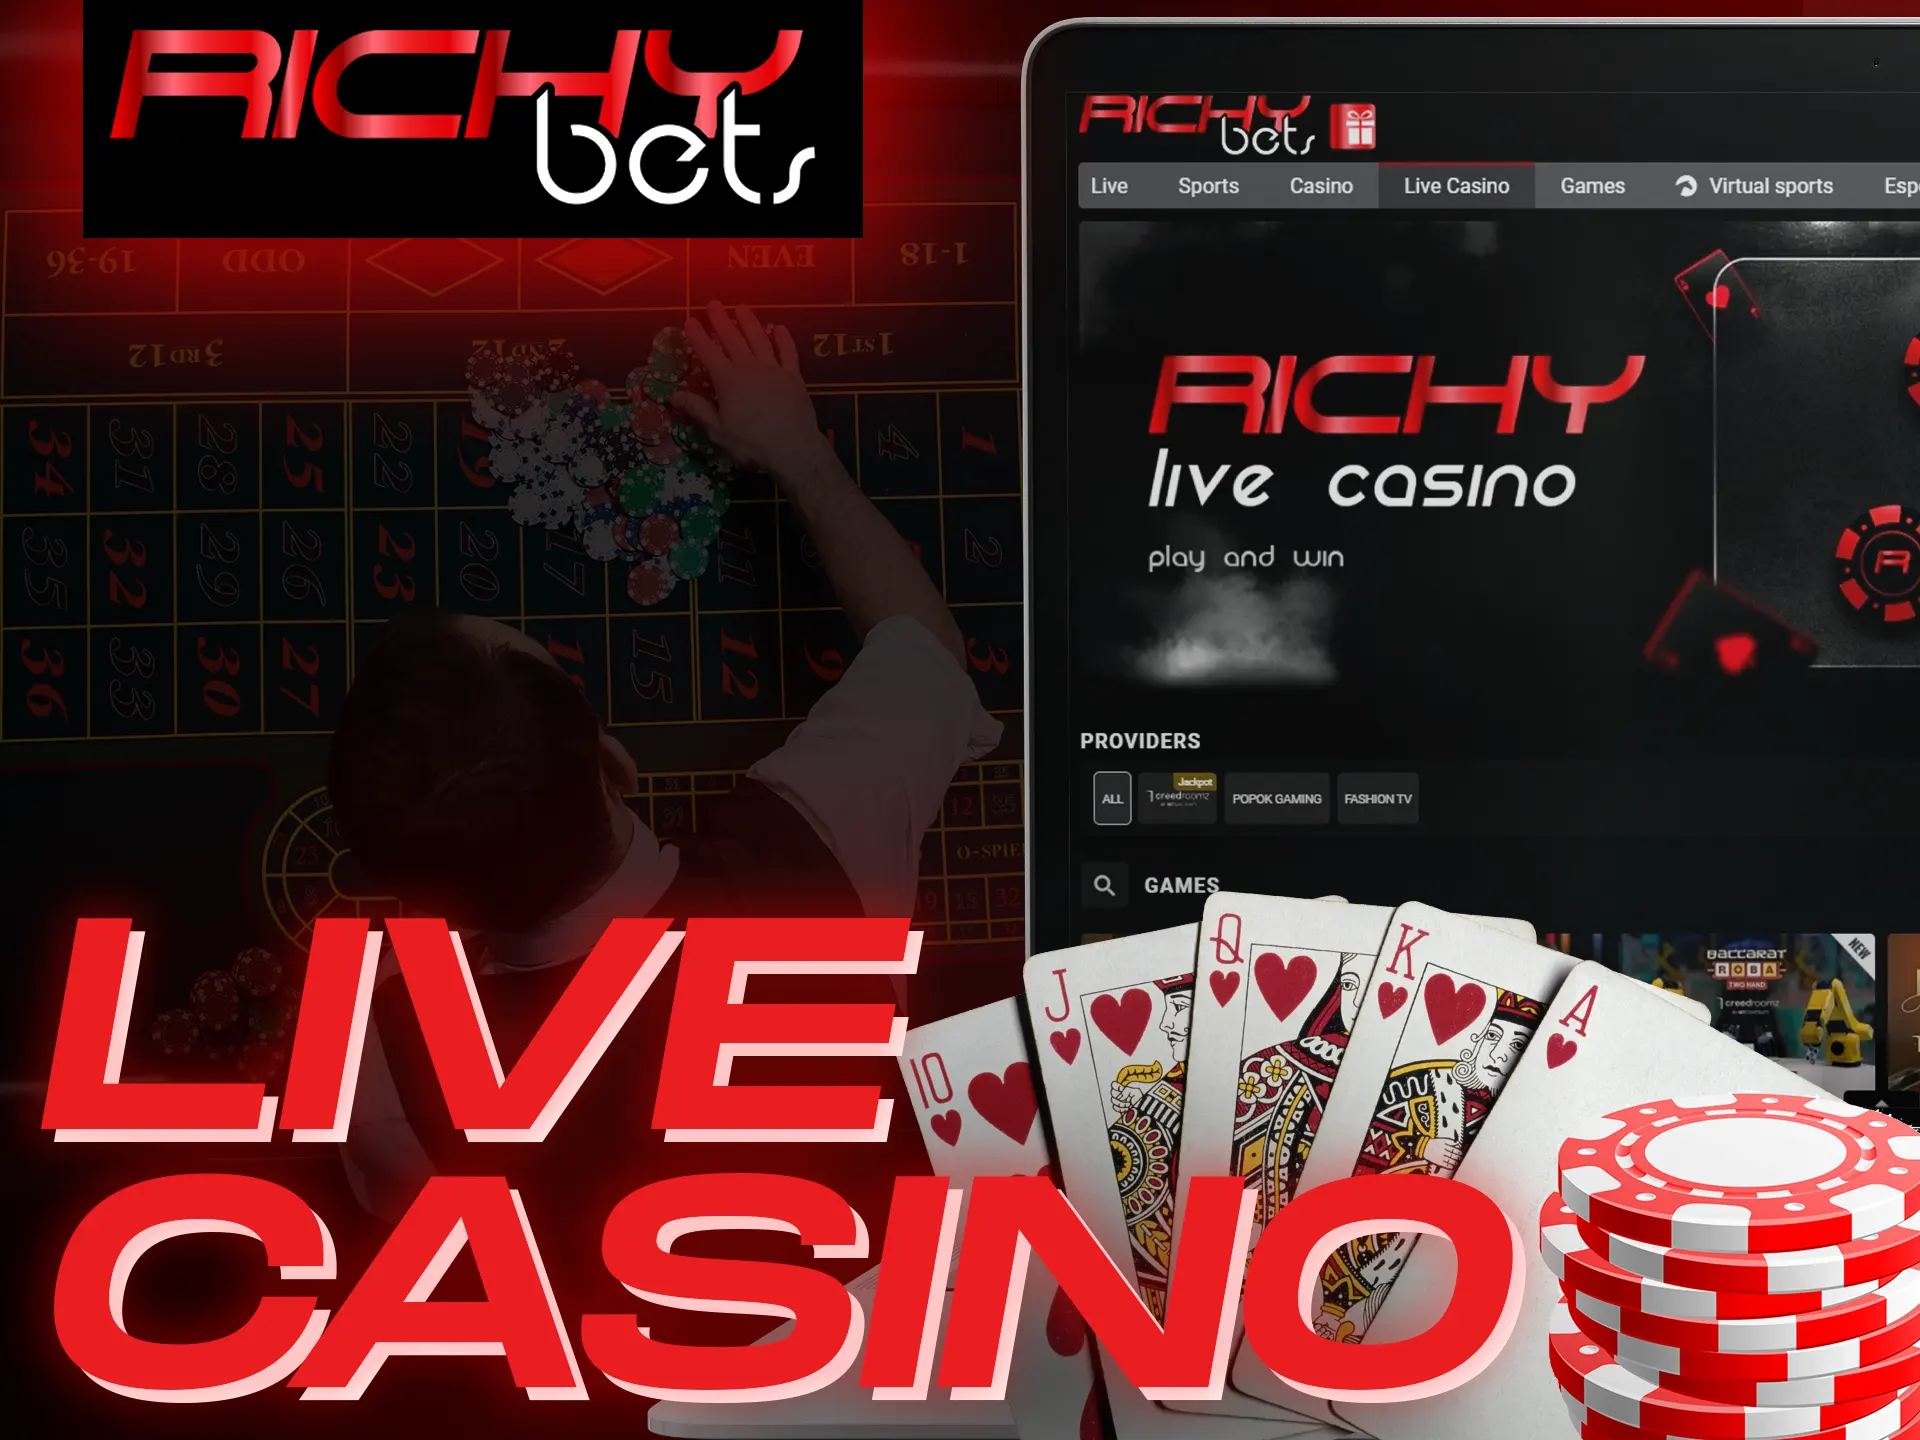 Play live casino games with real people at the Richybets casino.